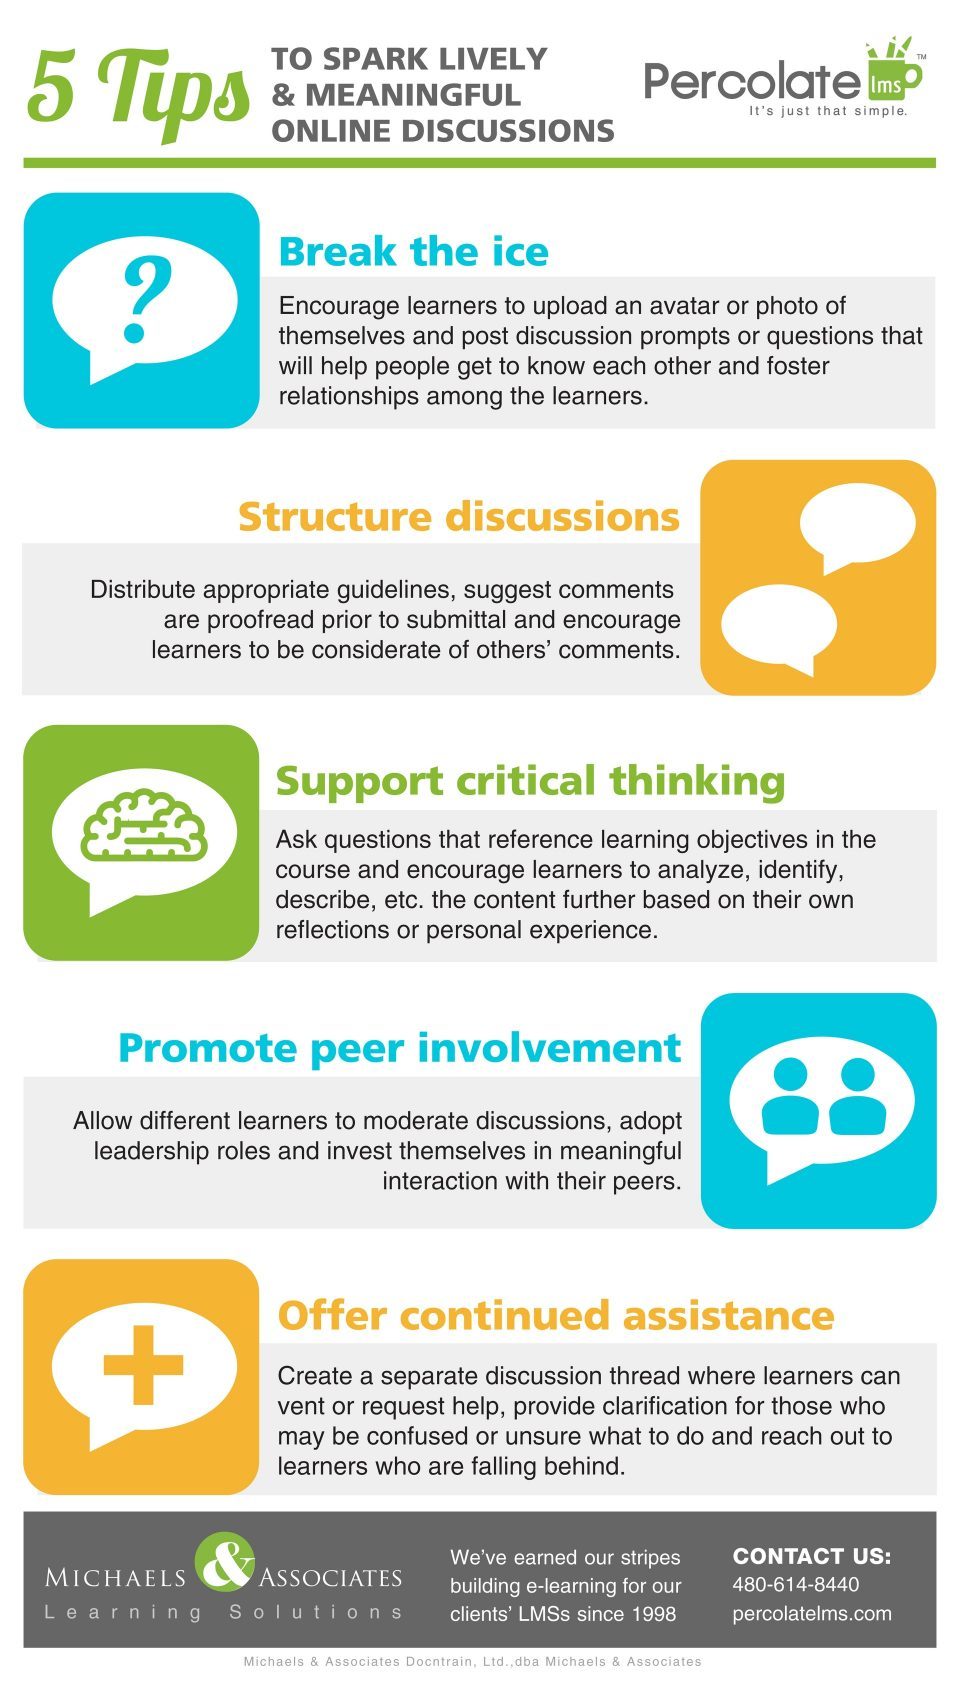 5 Tips to Spark Lively Online Discussions Infographic